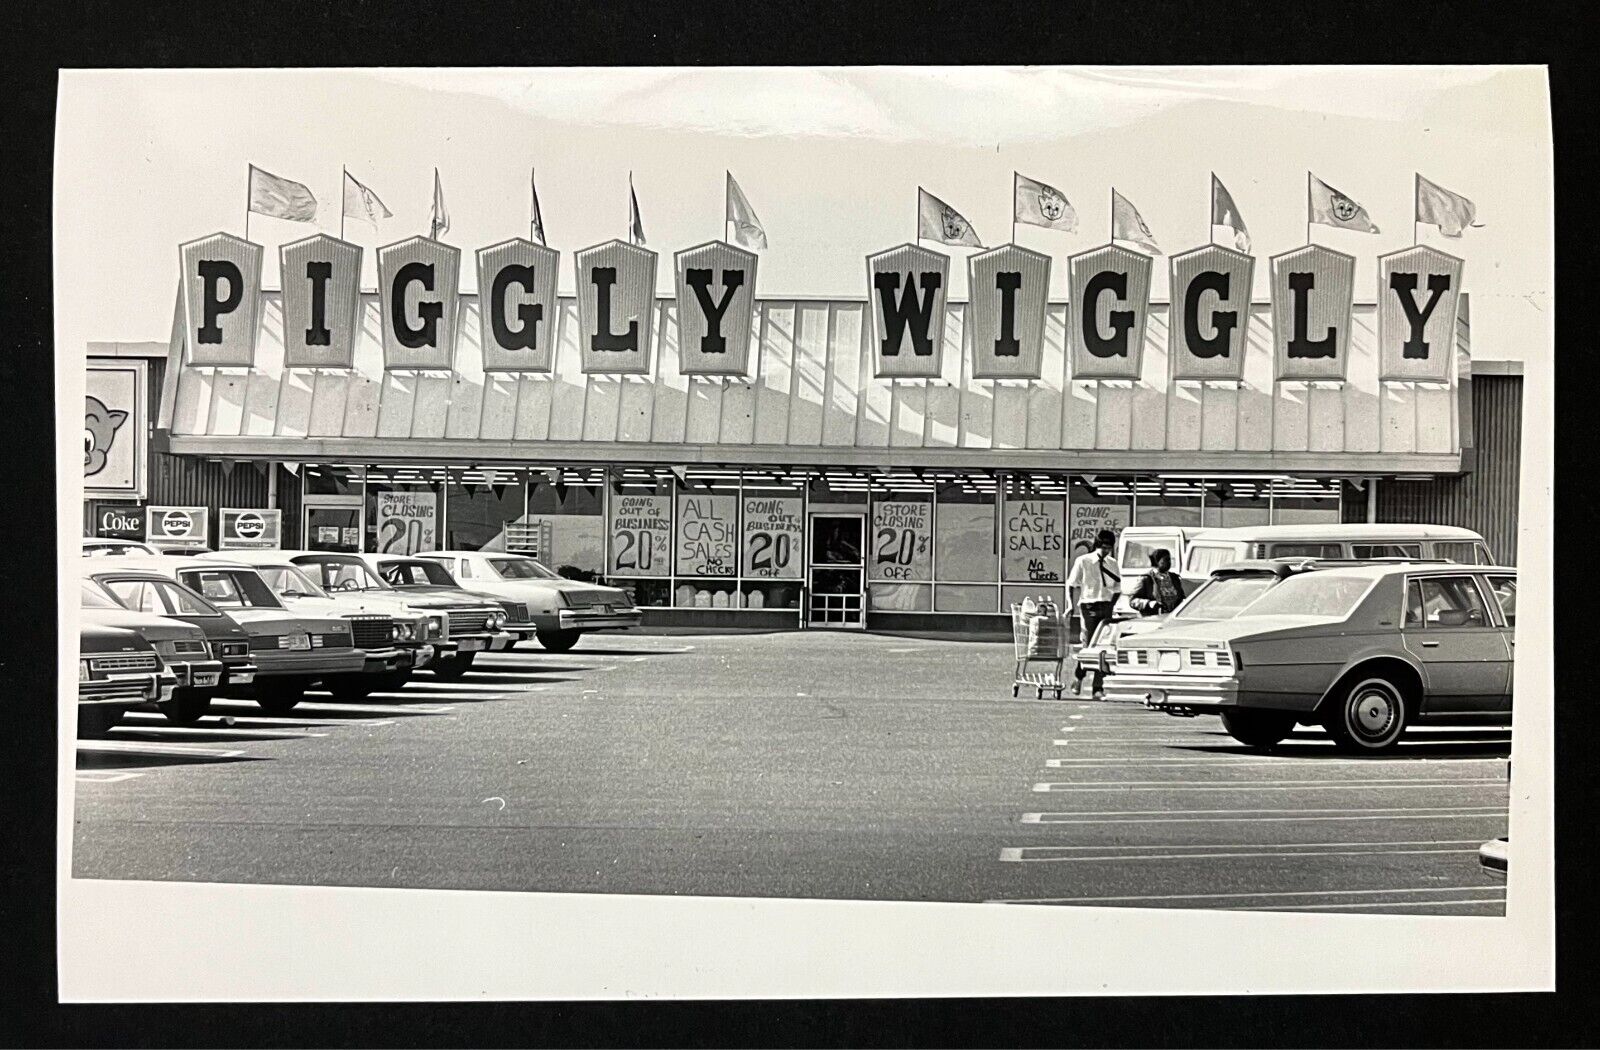 1982 Charlotte NC Piggly Wiggly Grocery Store Closing Sale Vintage Press Photo